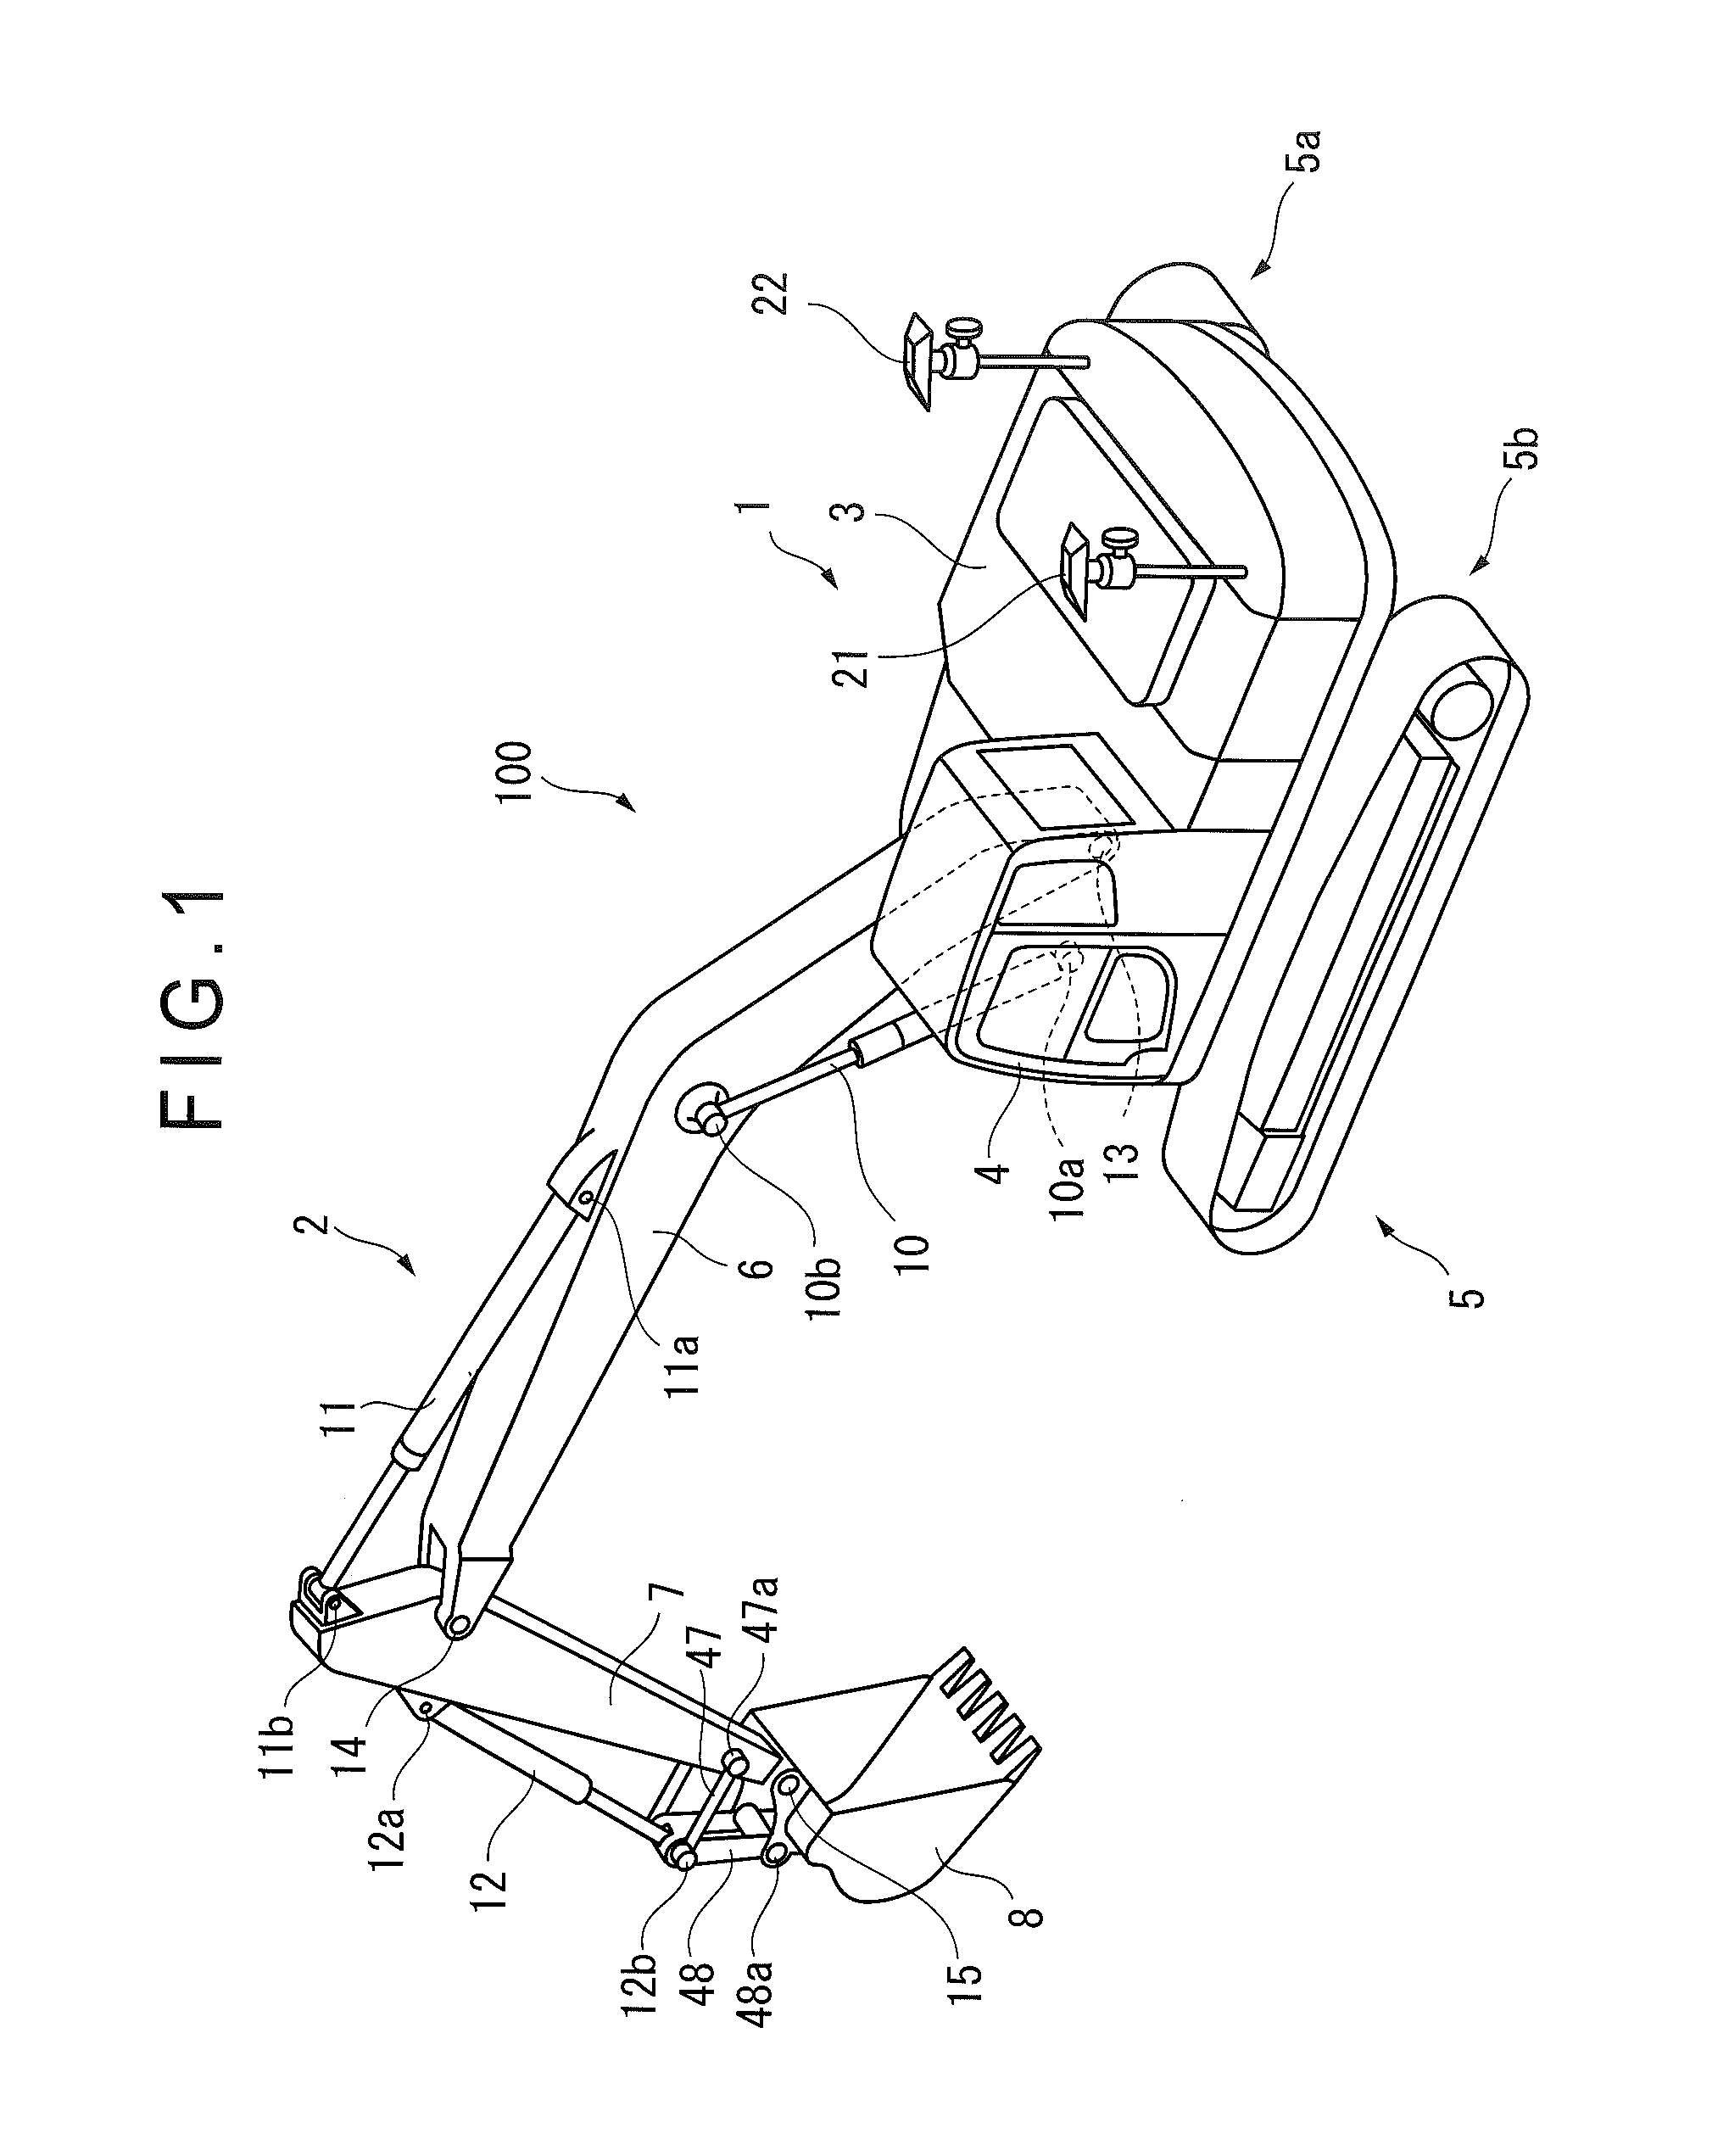 Construction Machinery Display System and Control Method for Same